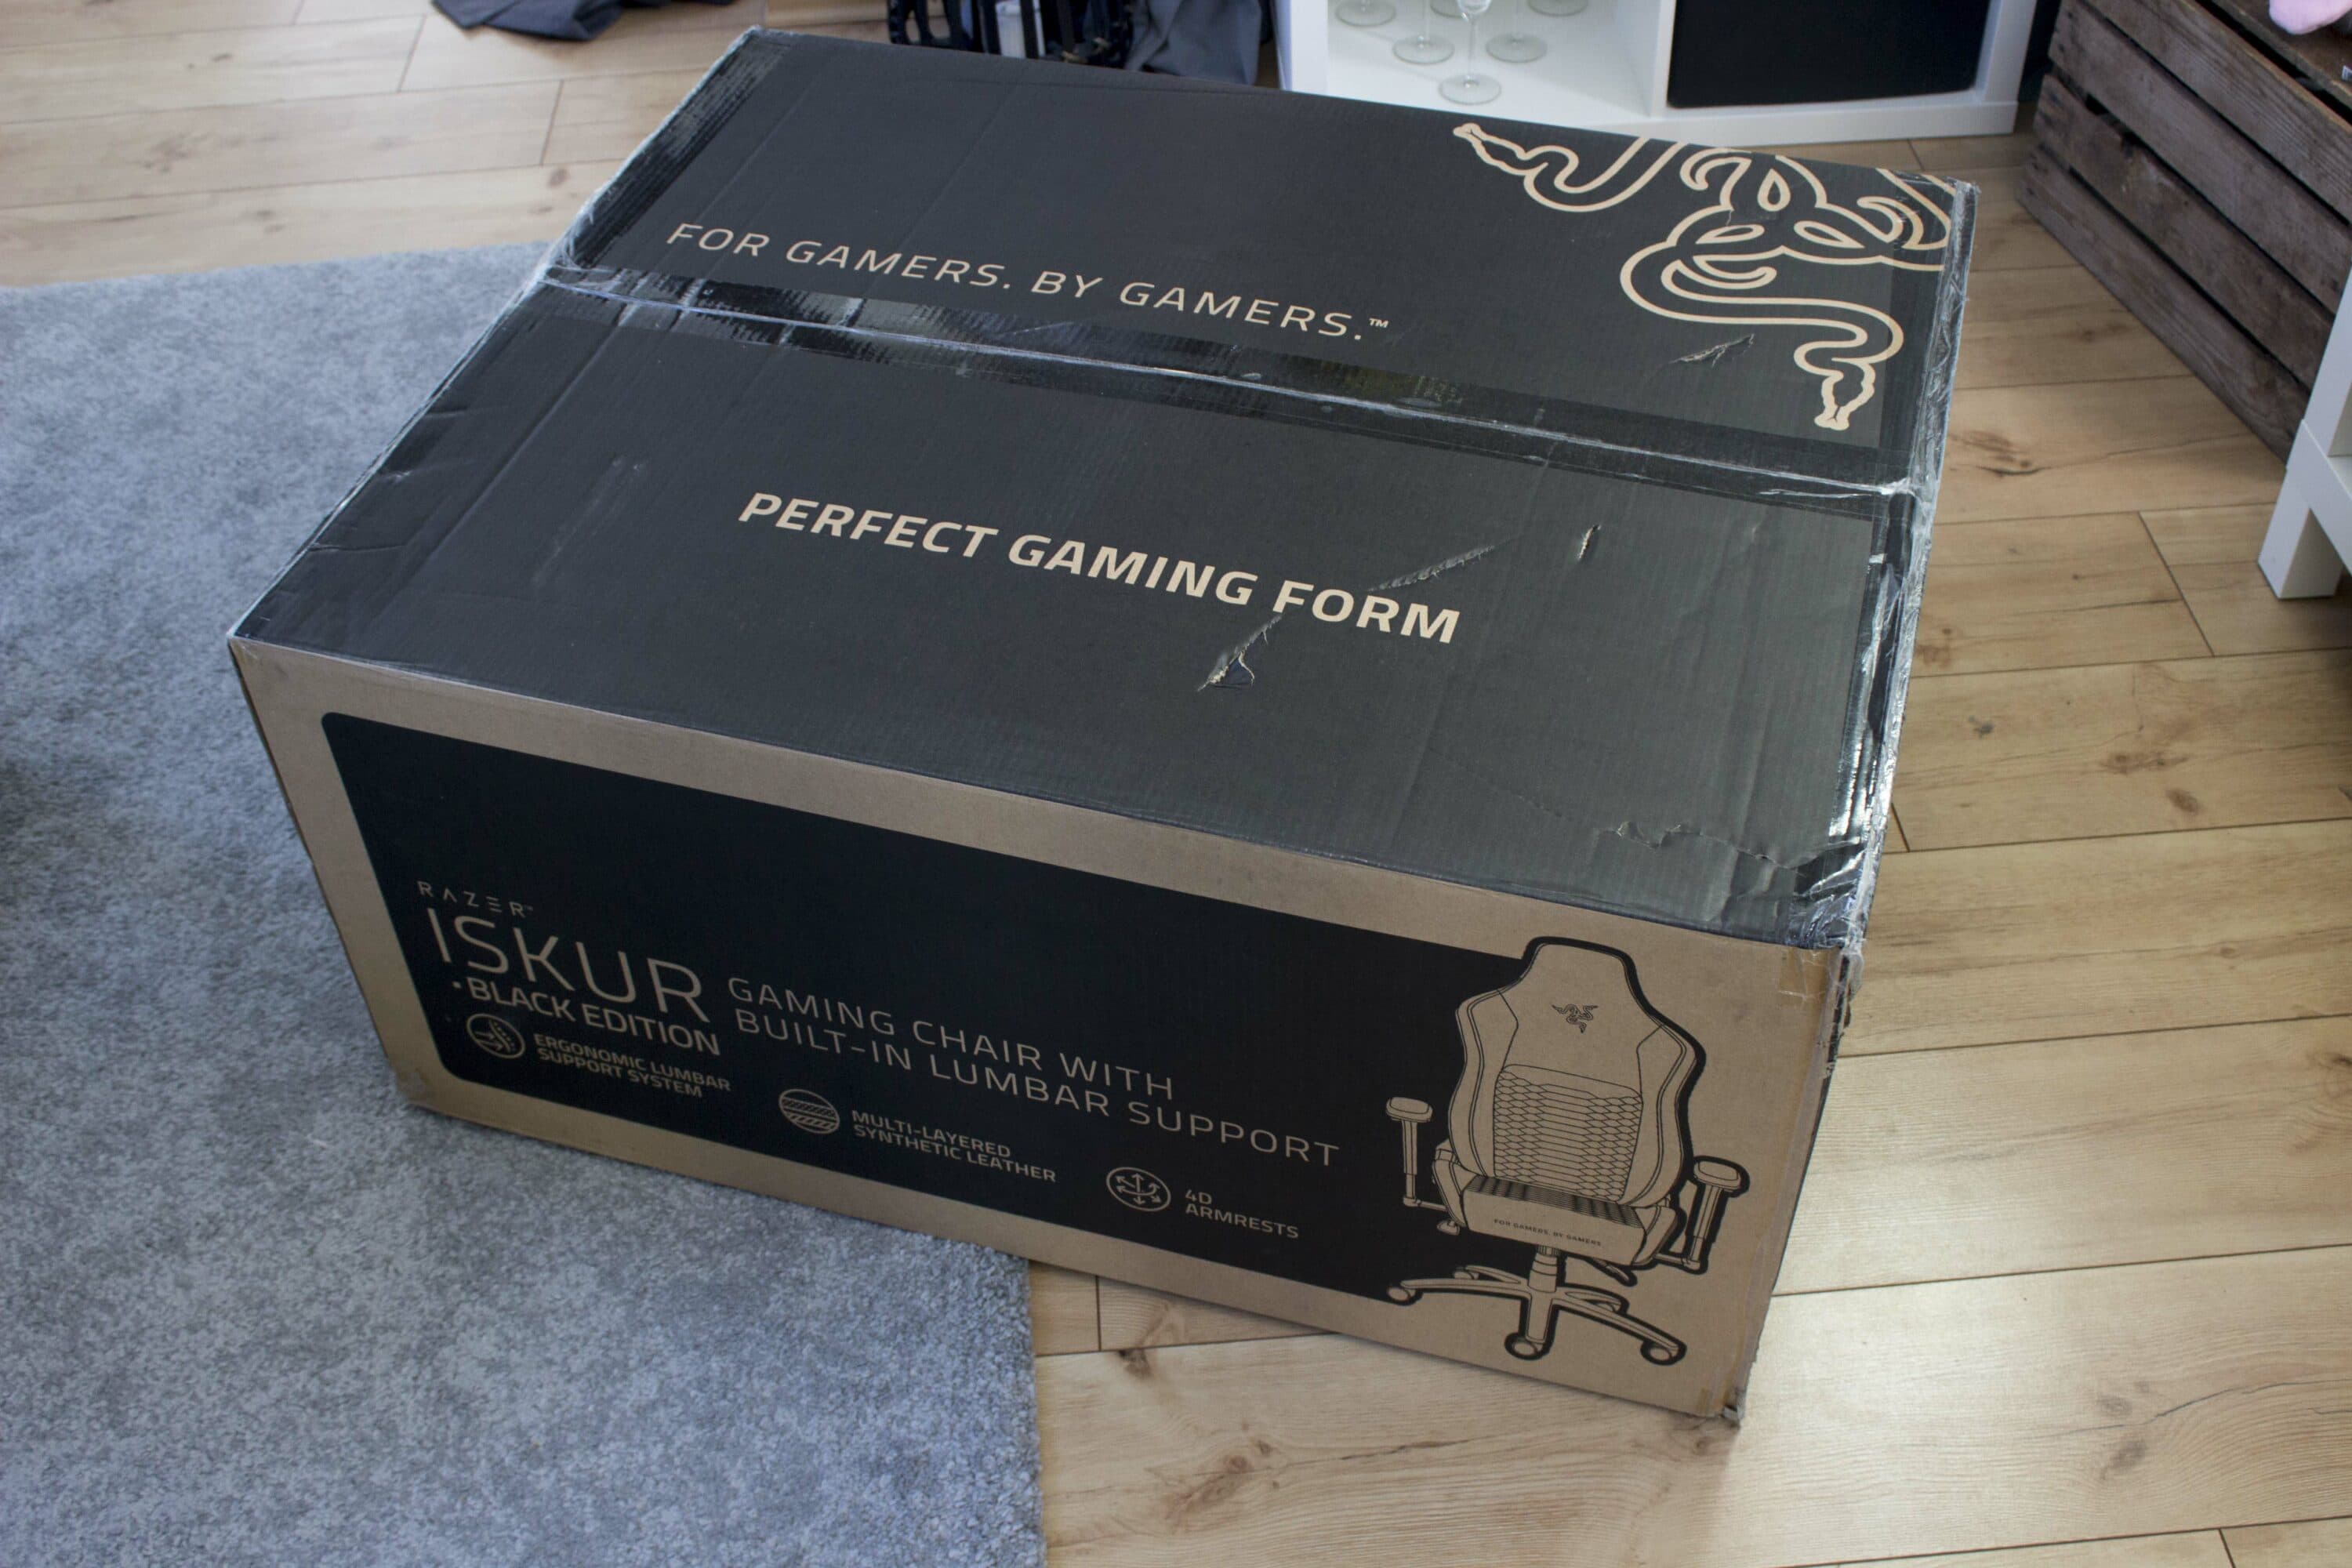 in test: chair with Razer Iskur gaming features special